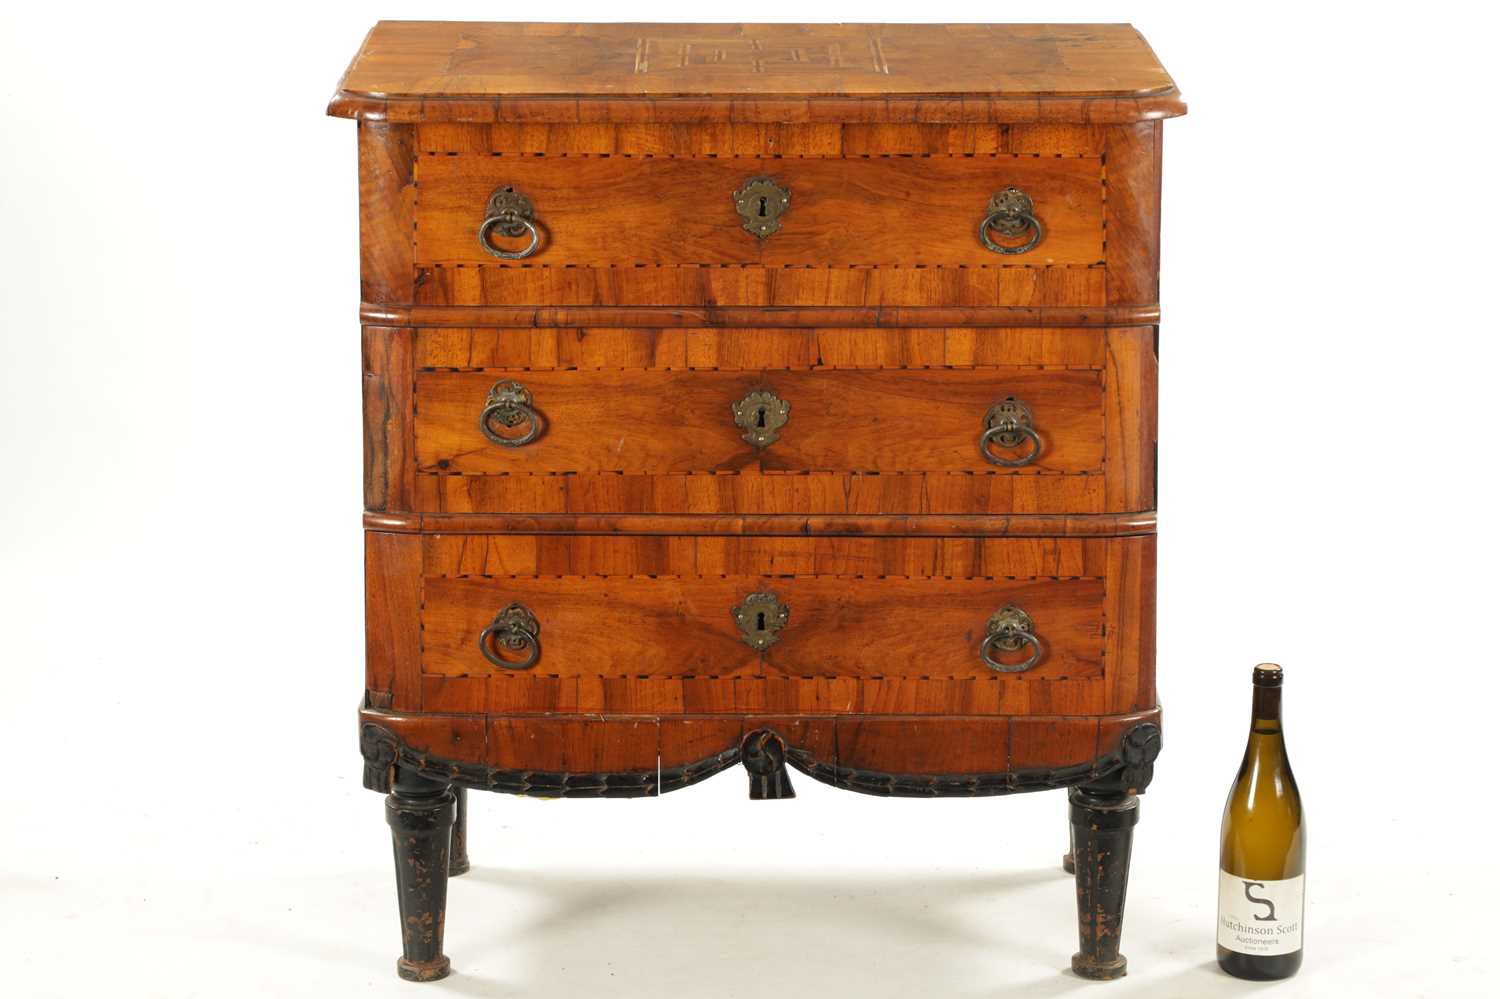 AN EARLY 18TH CENTURY ITALIAN OLIVE WOOD AND WALNUT CHEST OF DRAWERS - Image 5 of 8